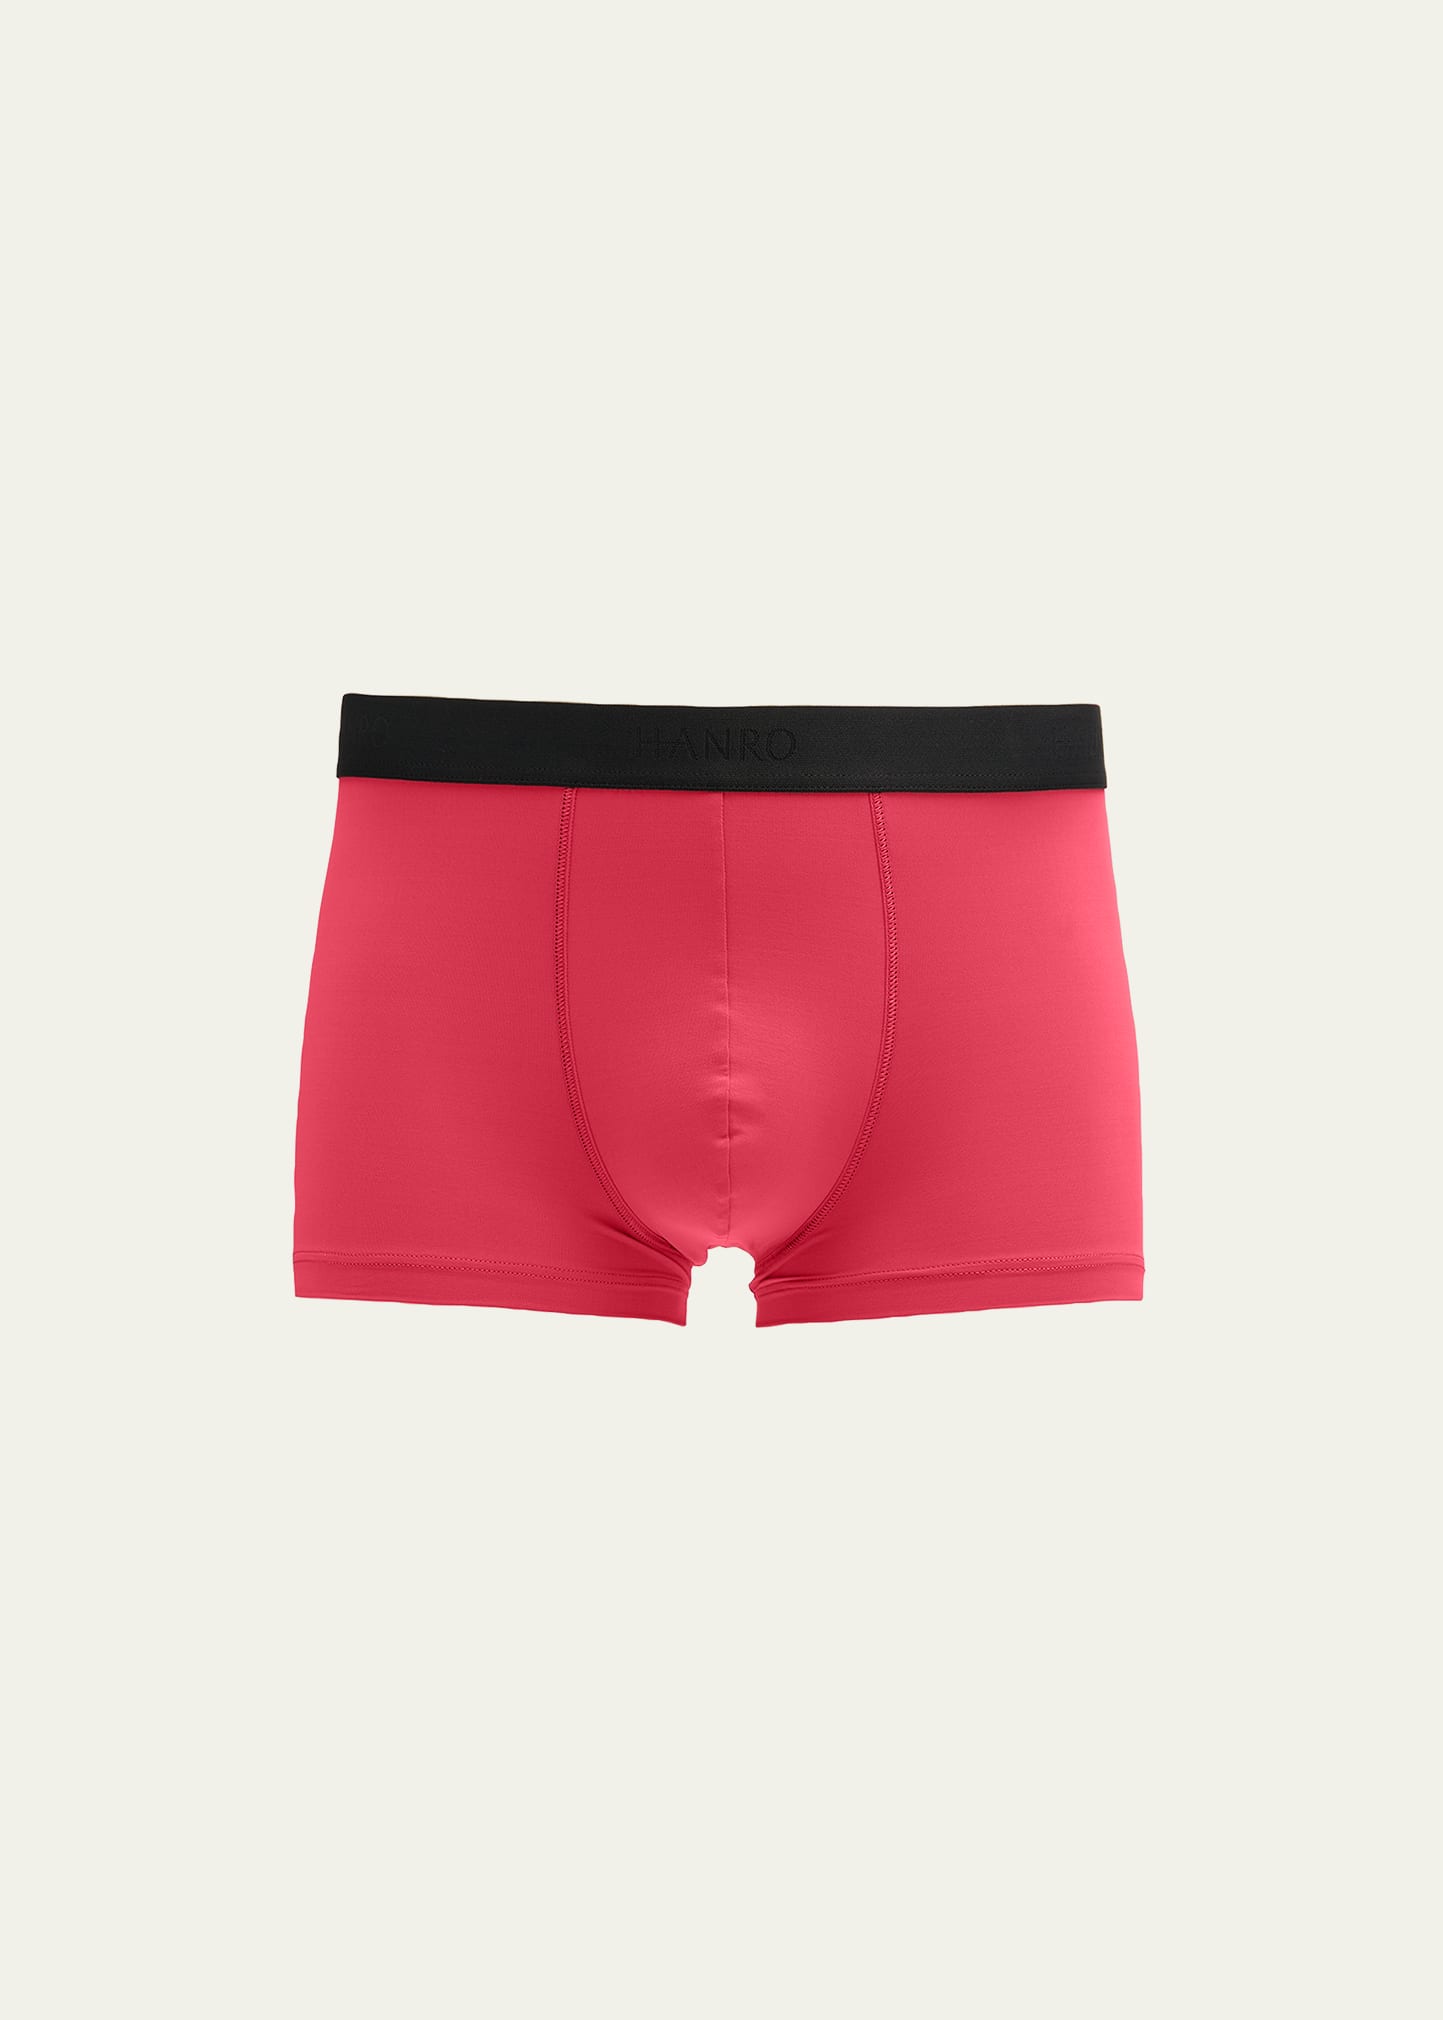 Red Pack of two cotton-blend briefs, Hanro